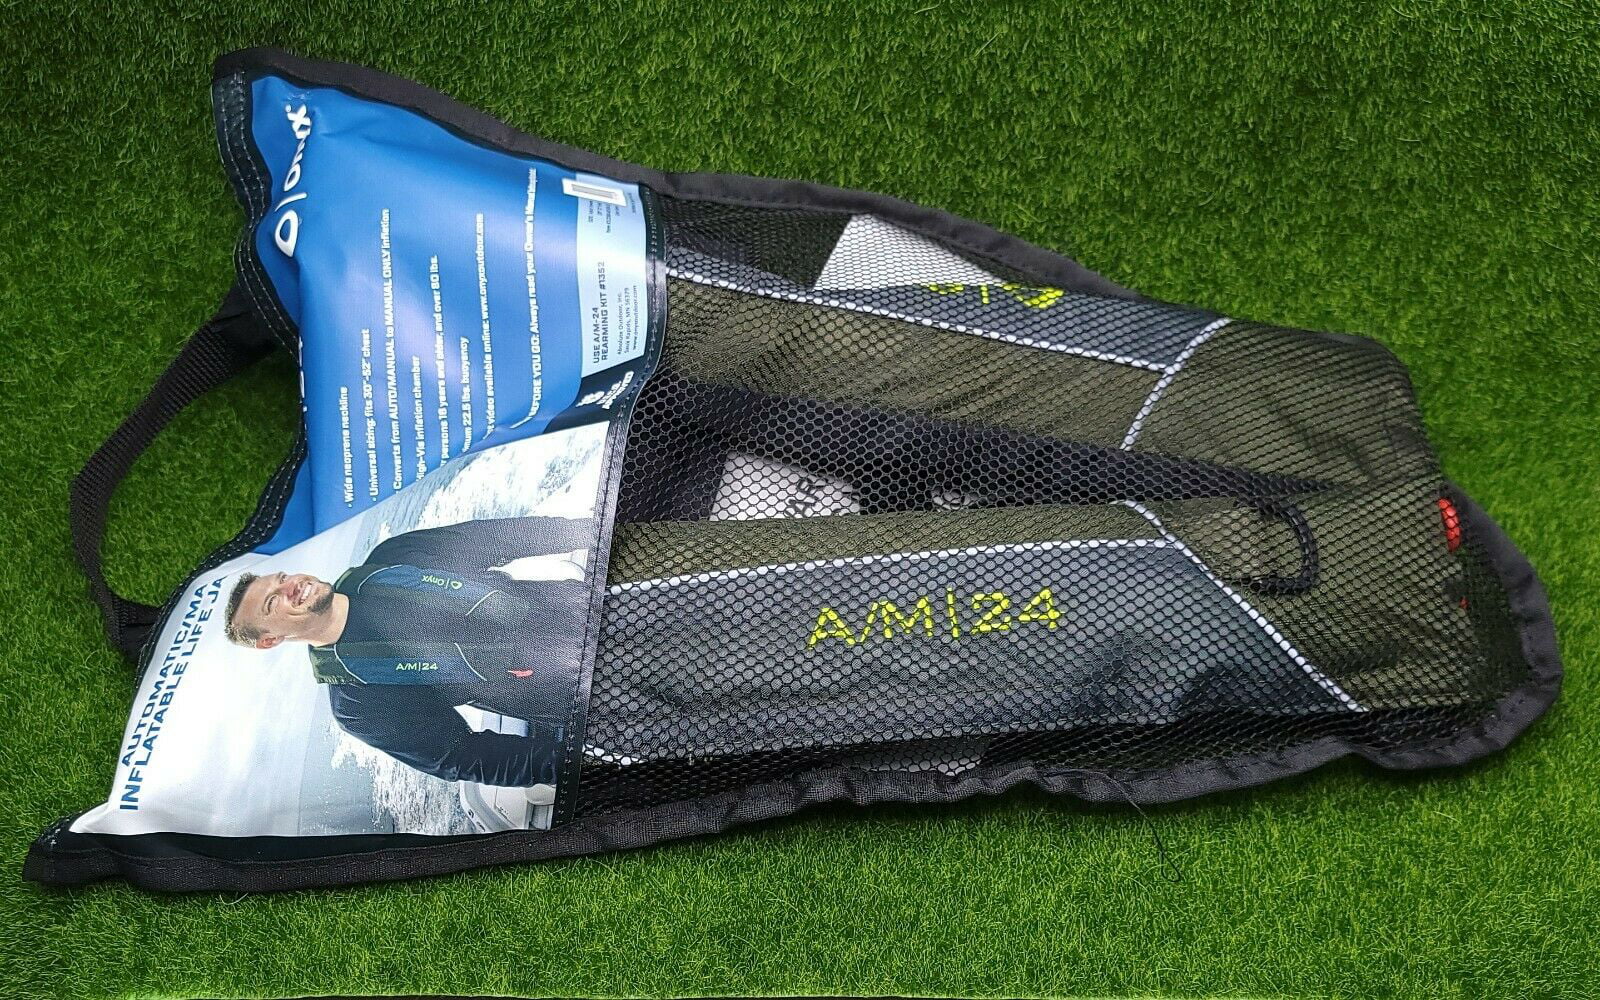 Absolute Outdoor Onyx C02 Manual PFD-Rearming Kit for sale online 